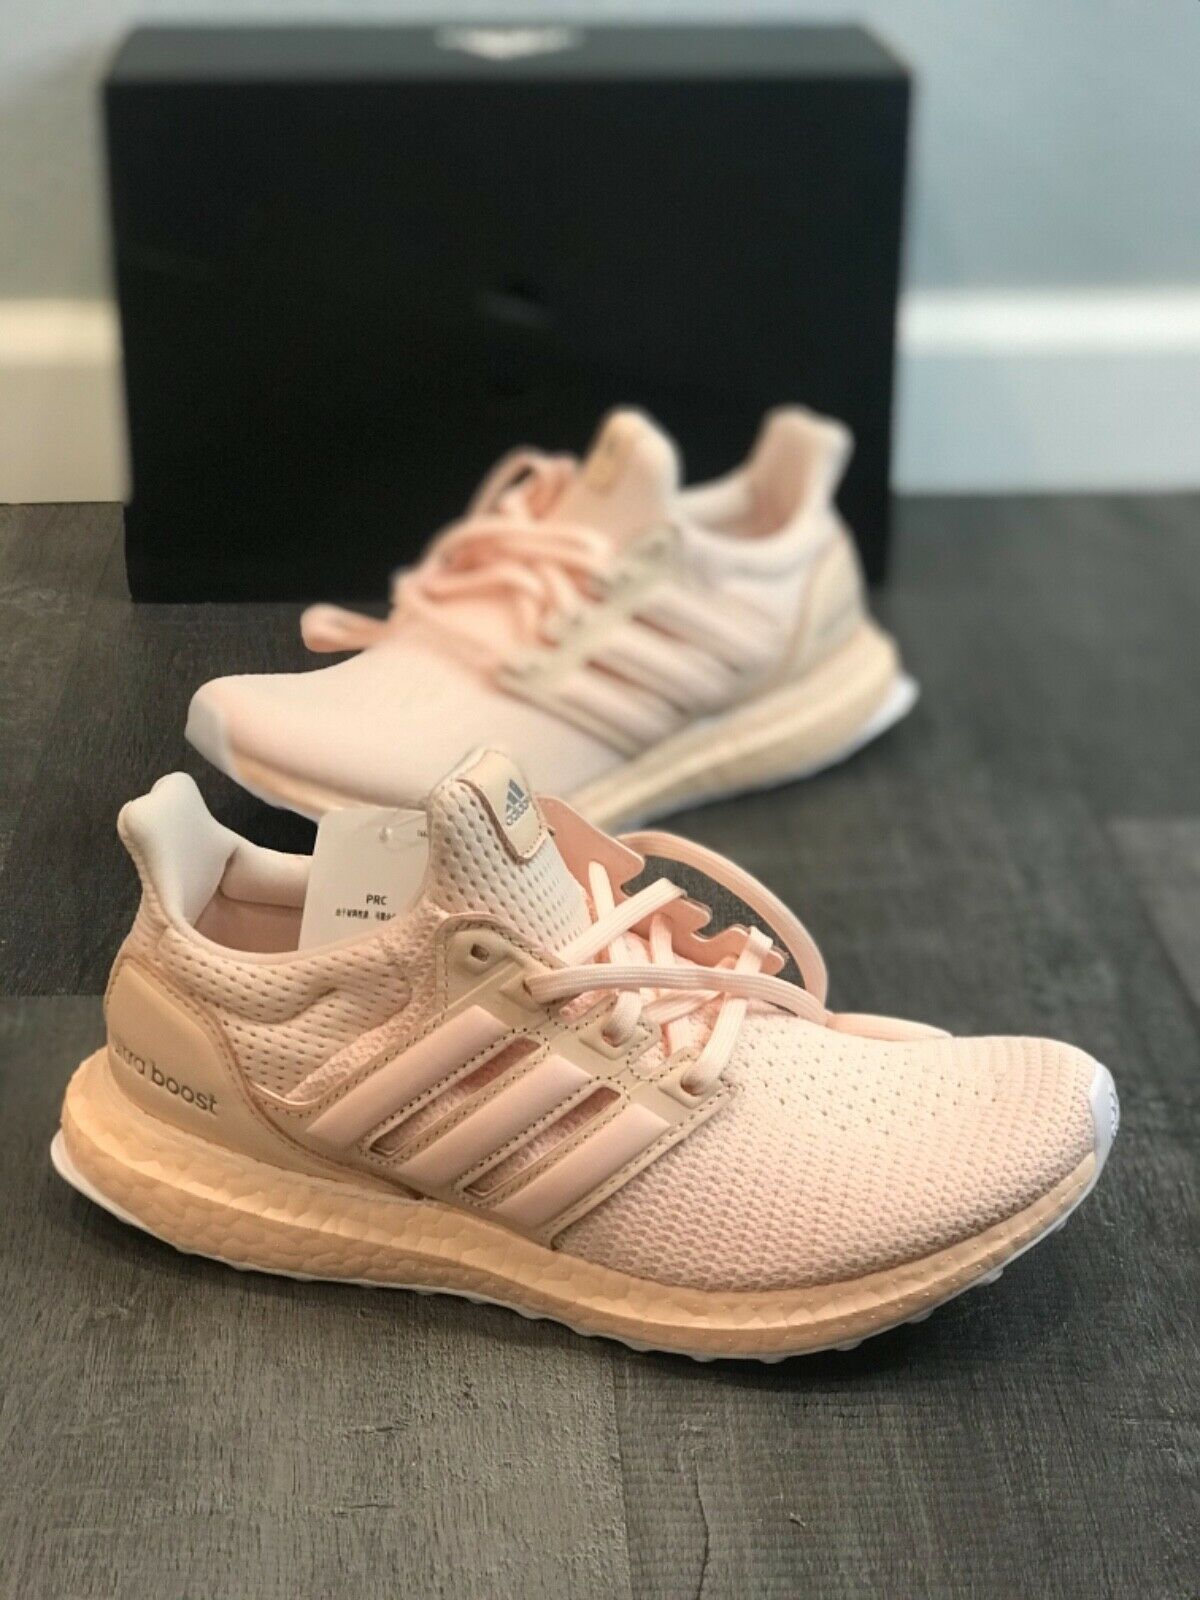 Adidas Ultraboost Pink Tint (FY6828) Women's Size 7 Running Shoes RARE LIMITED